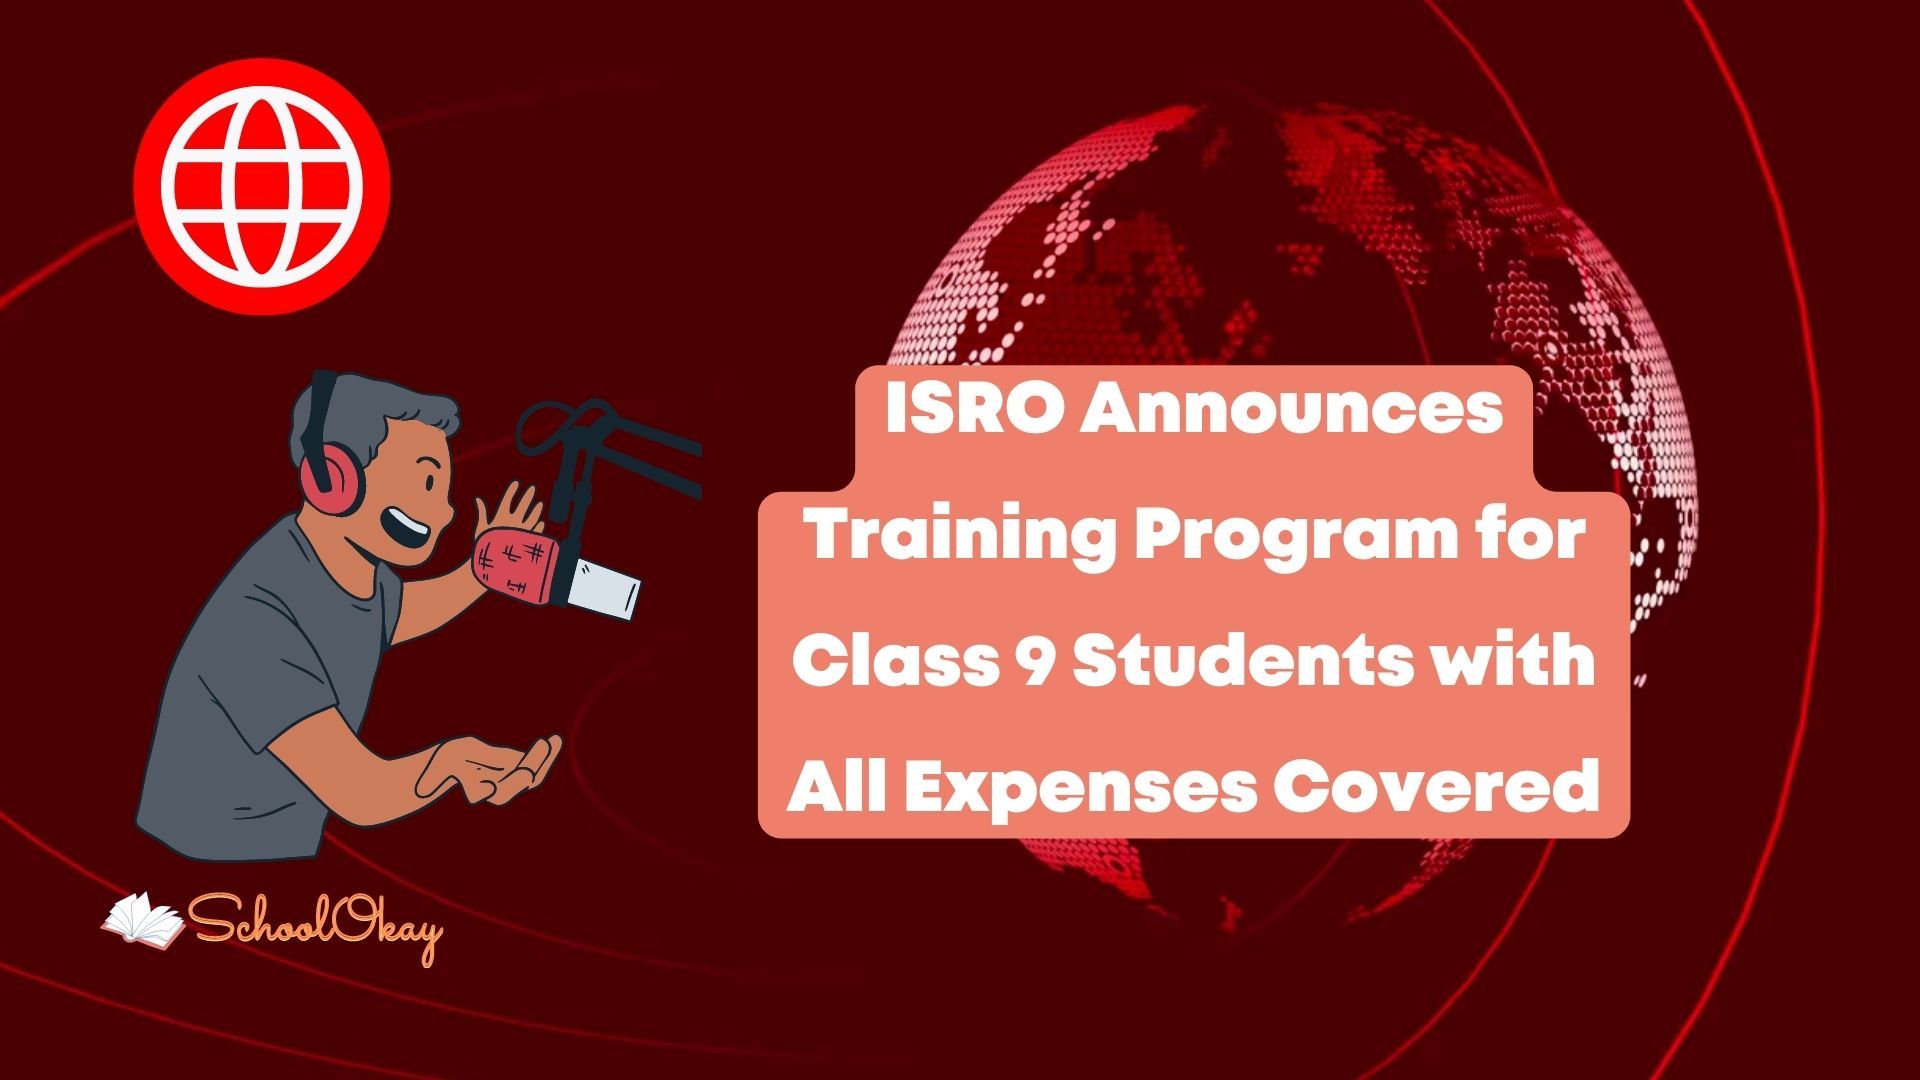 ISRO Announces Training Program for Class 9 Students with All Expenses Covered